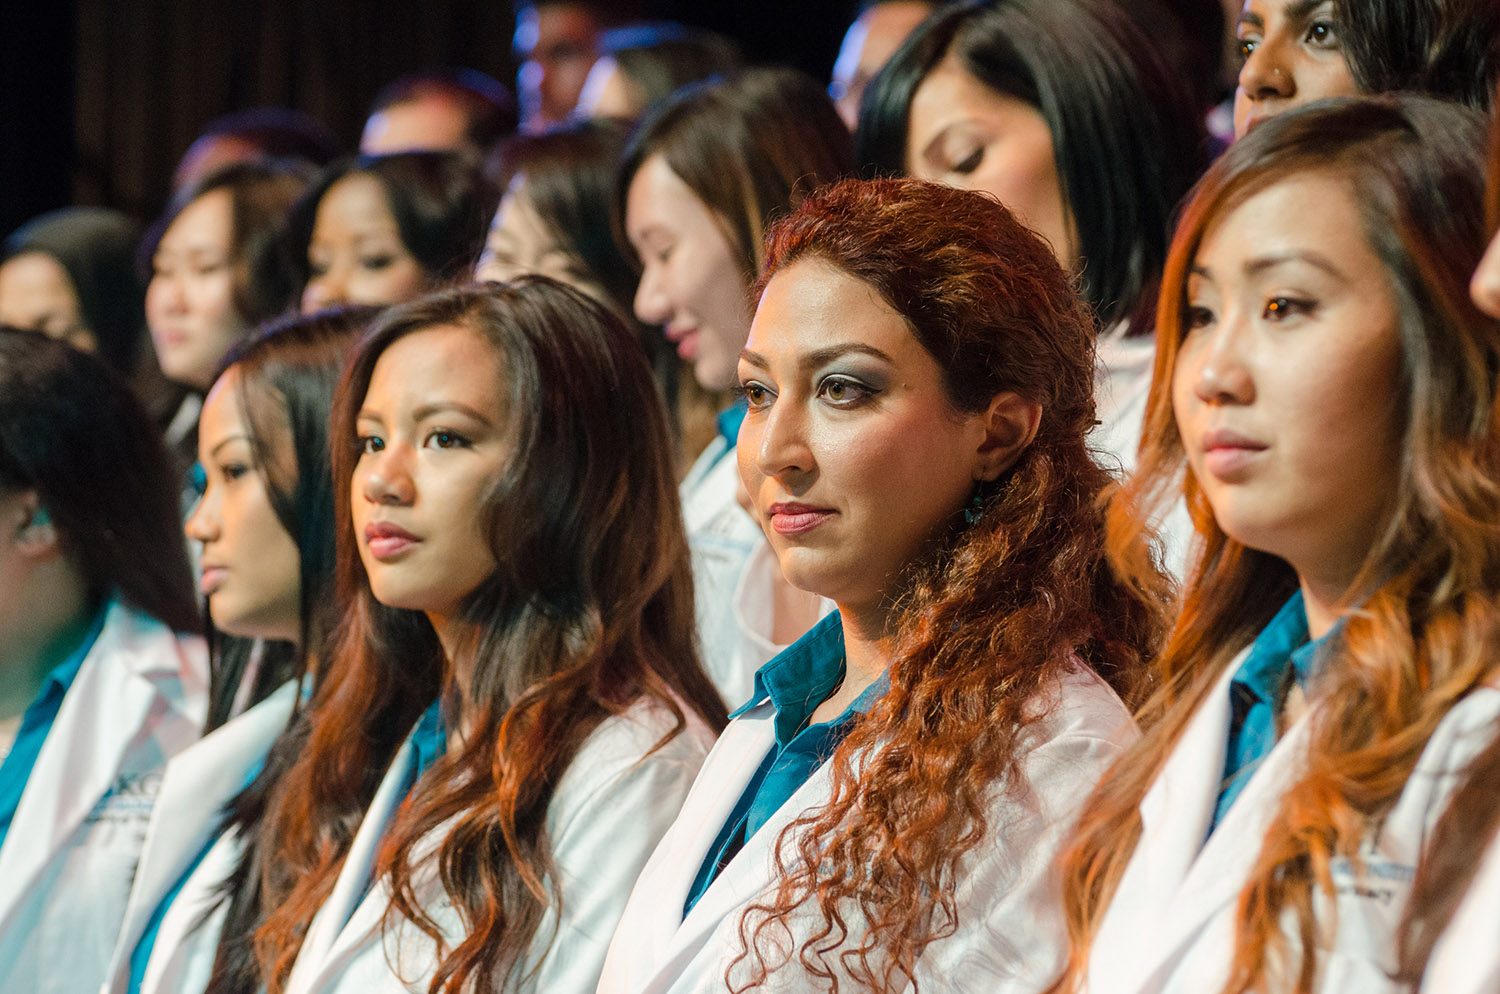 New KGI School of Pharmacy Students at the 2015 White Coat Ceremony.